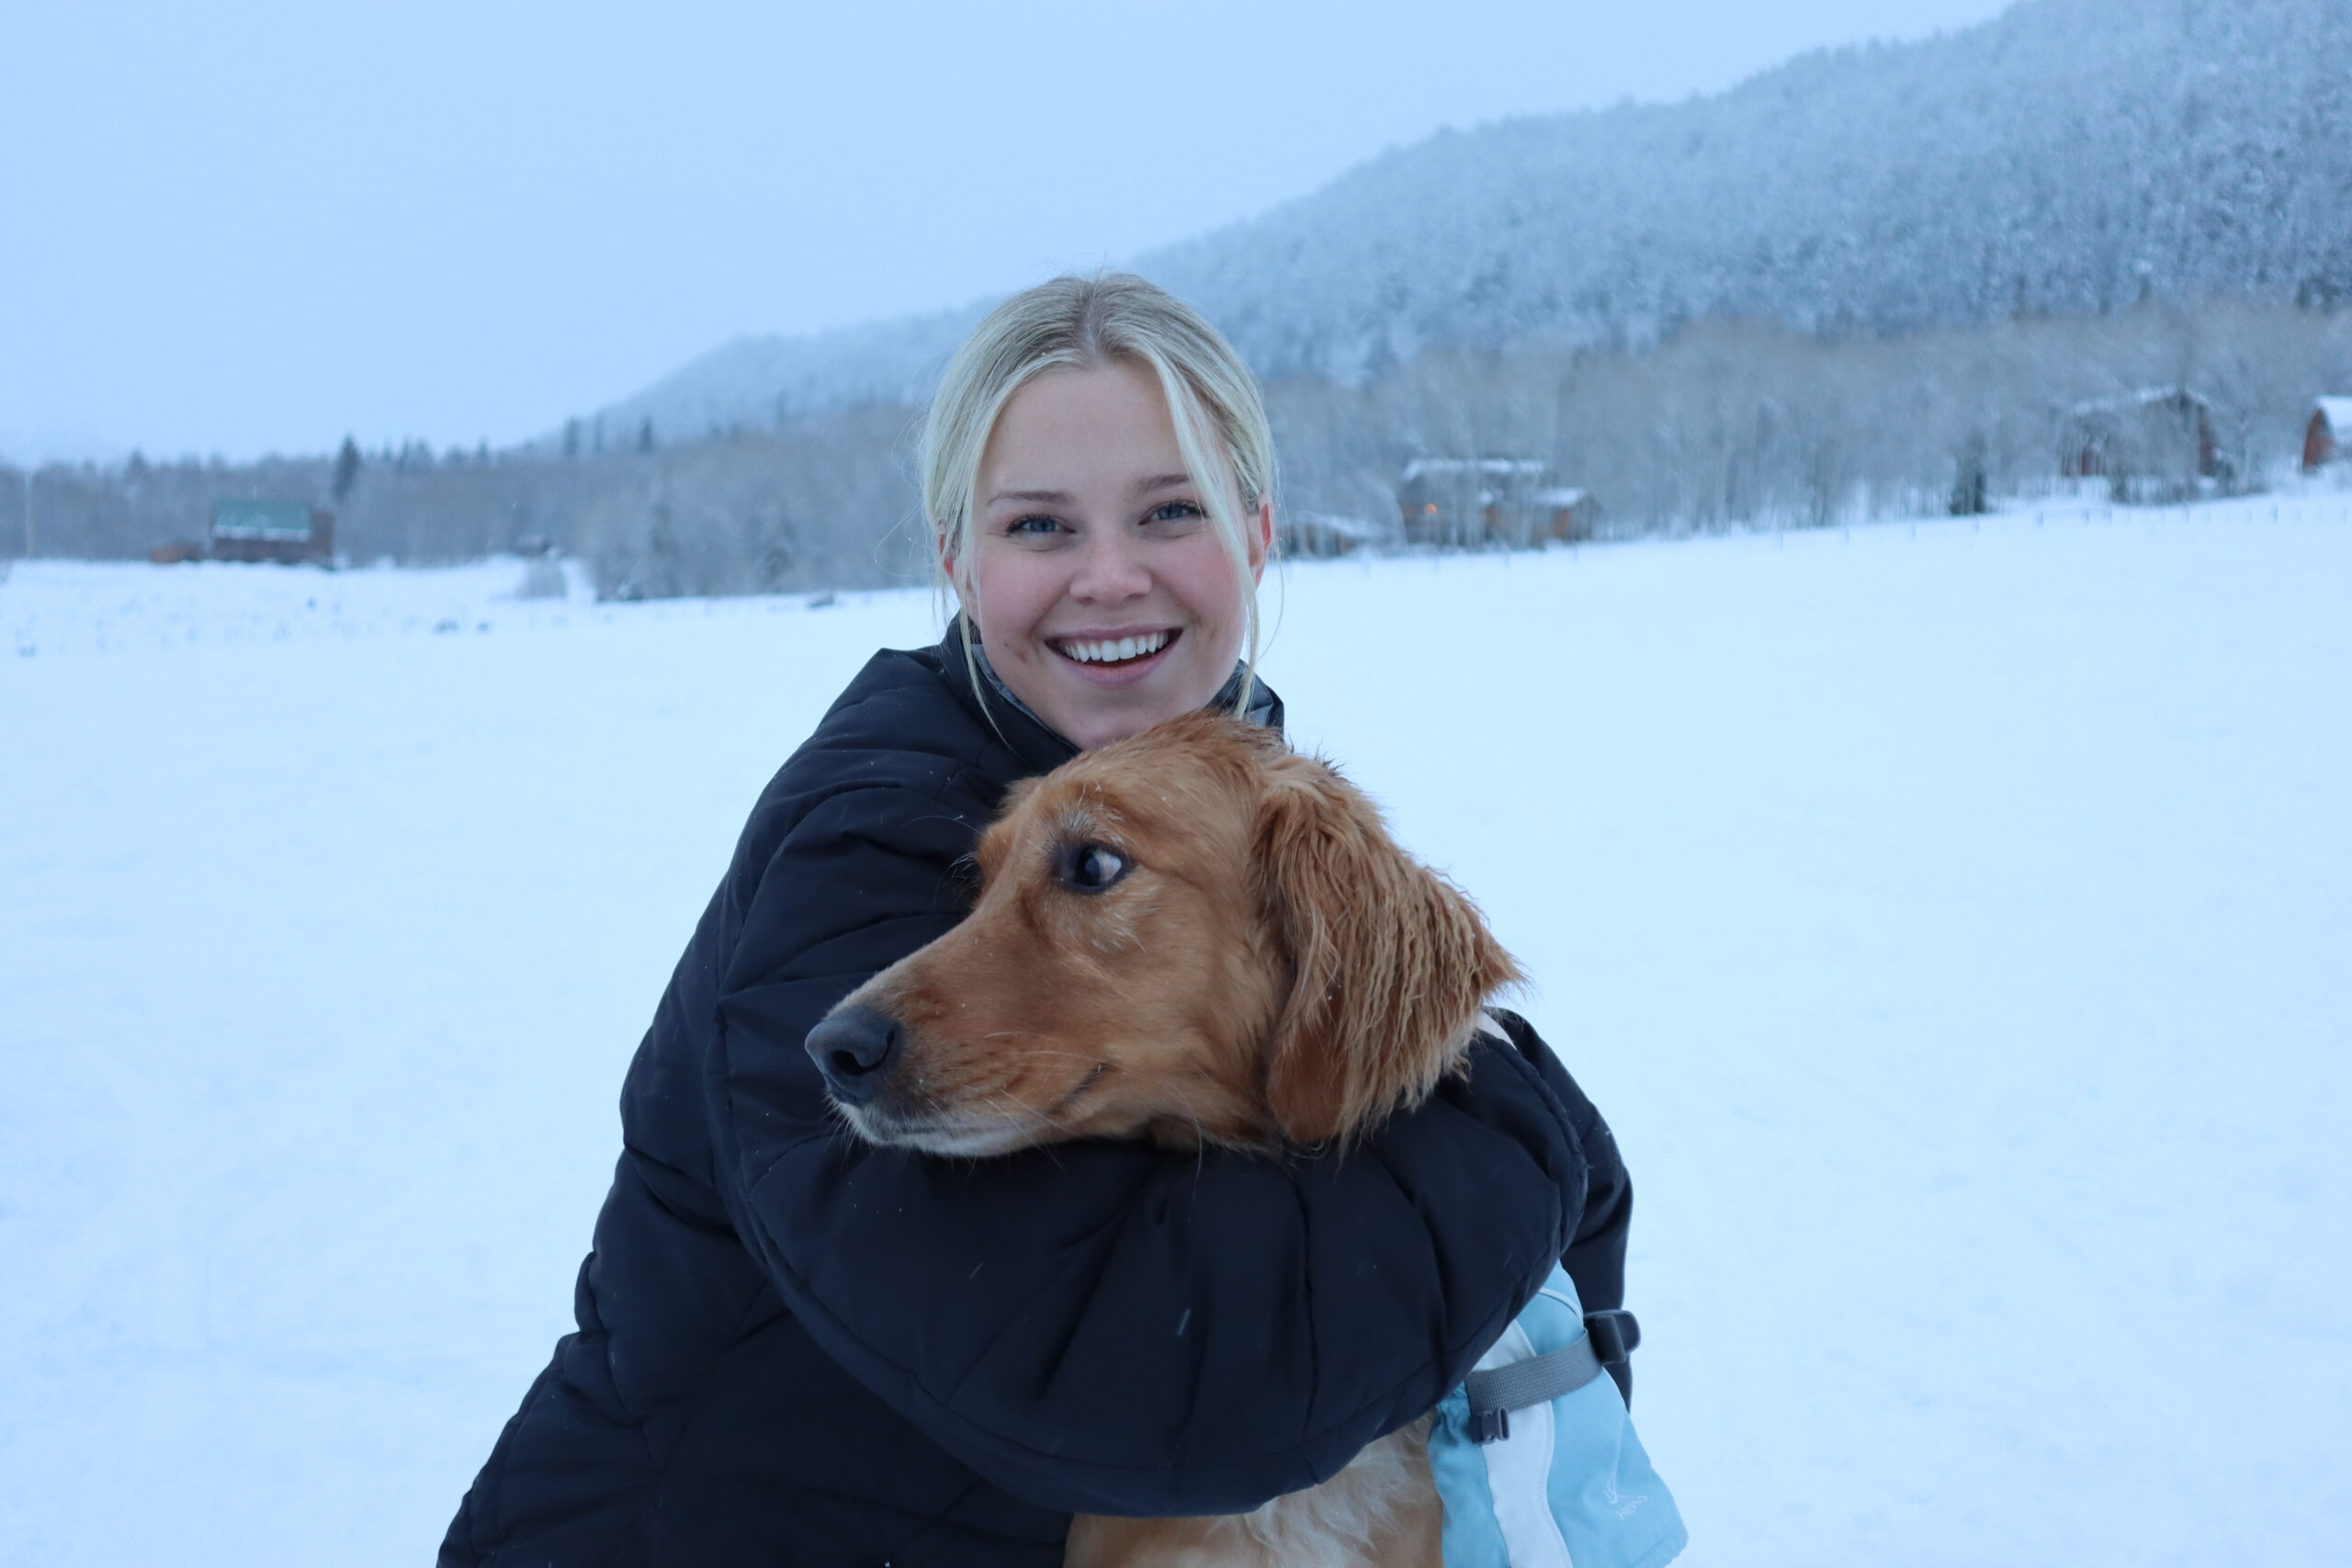 Haley Hilton, blond in a black jacket, hugs her brown dog in front of a snowy wilderness background.